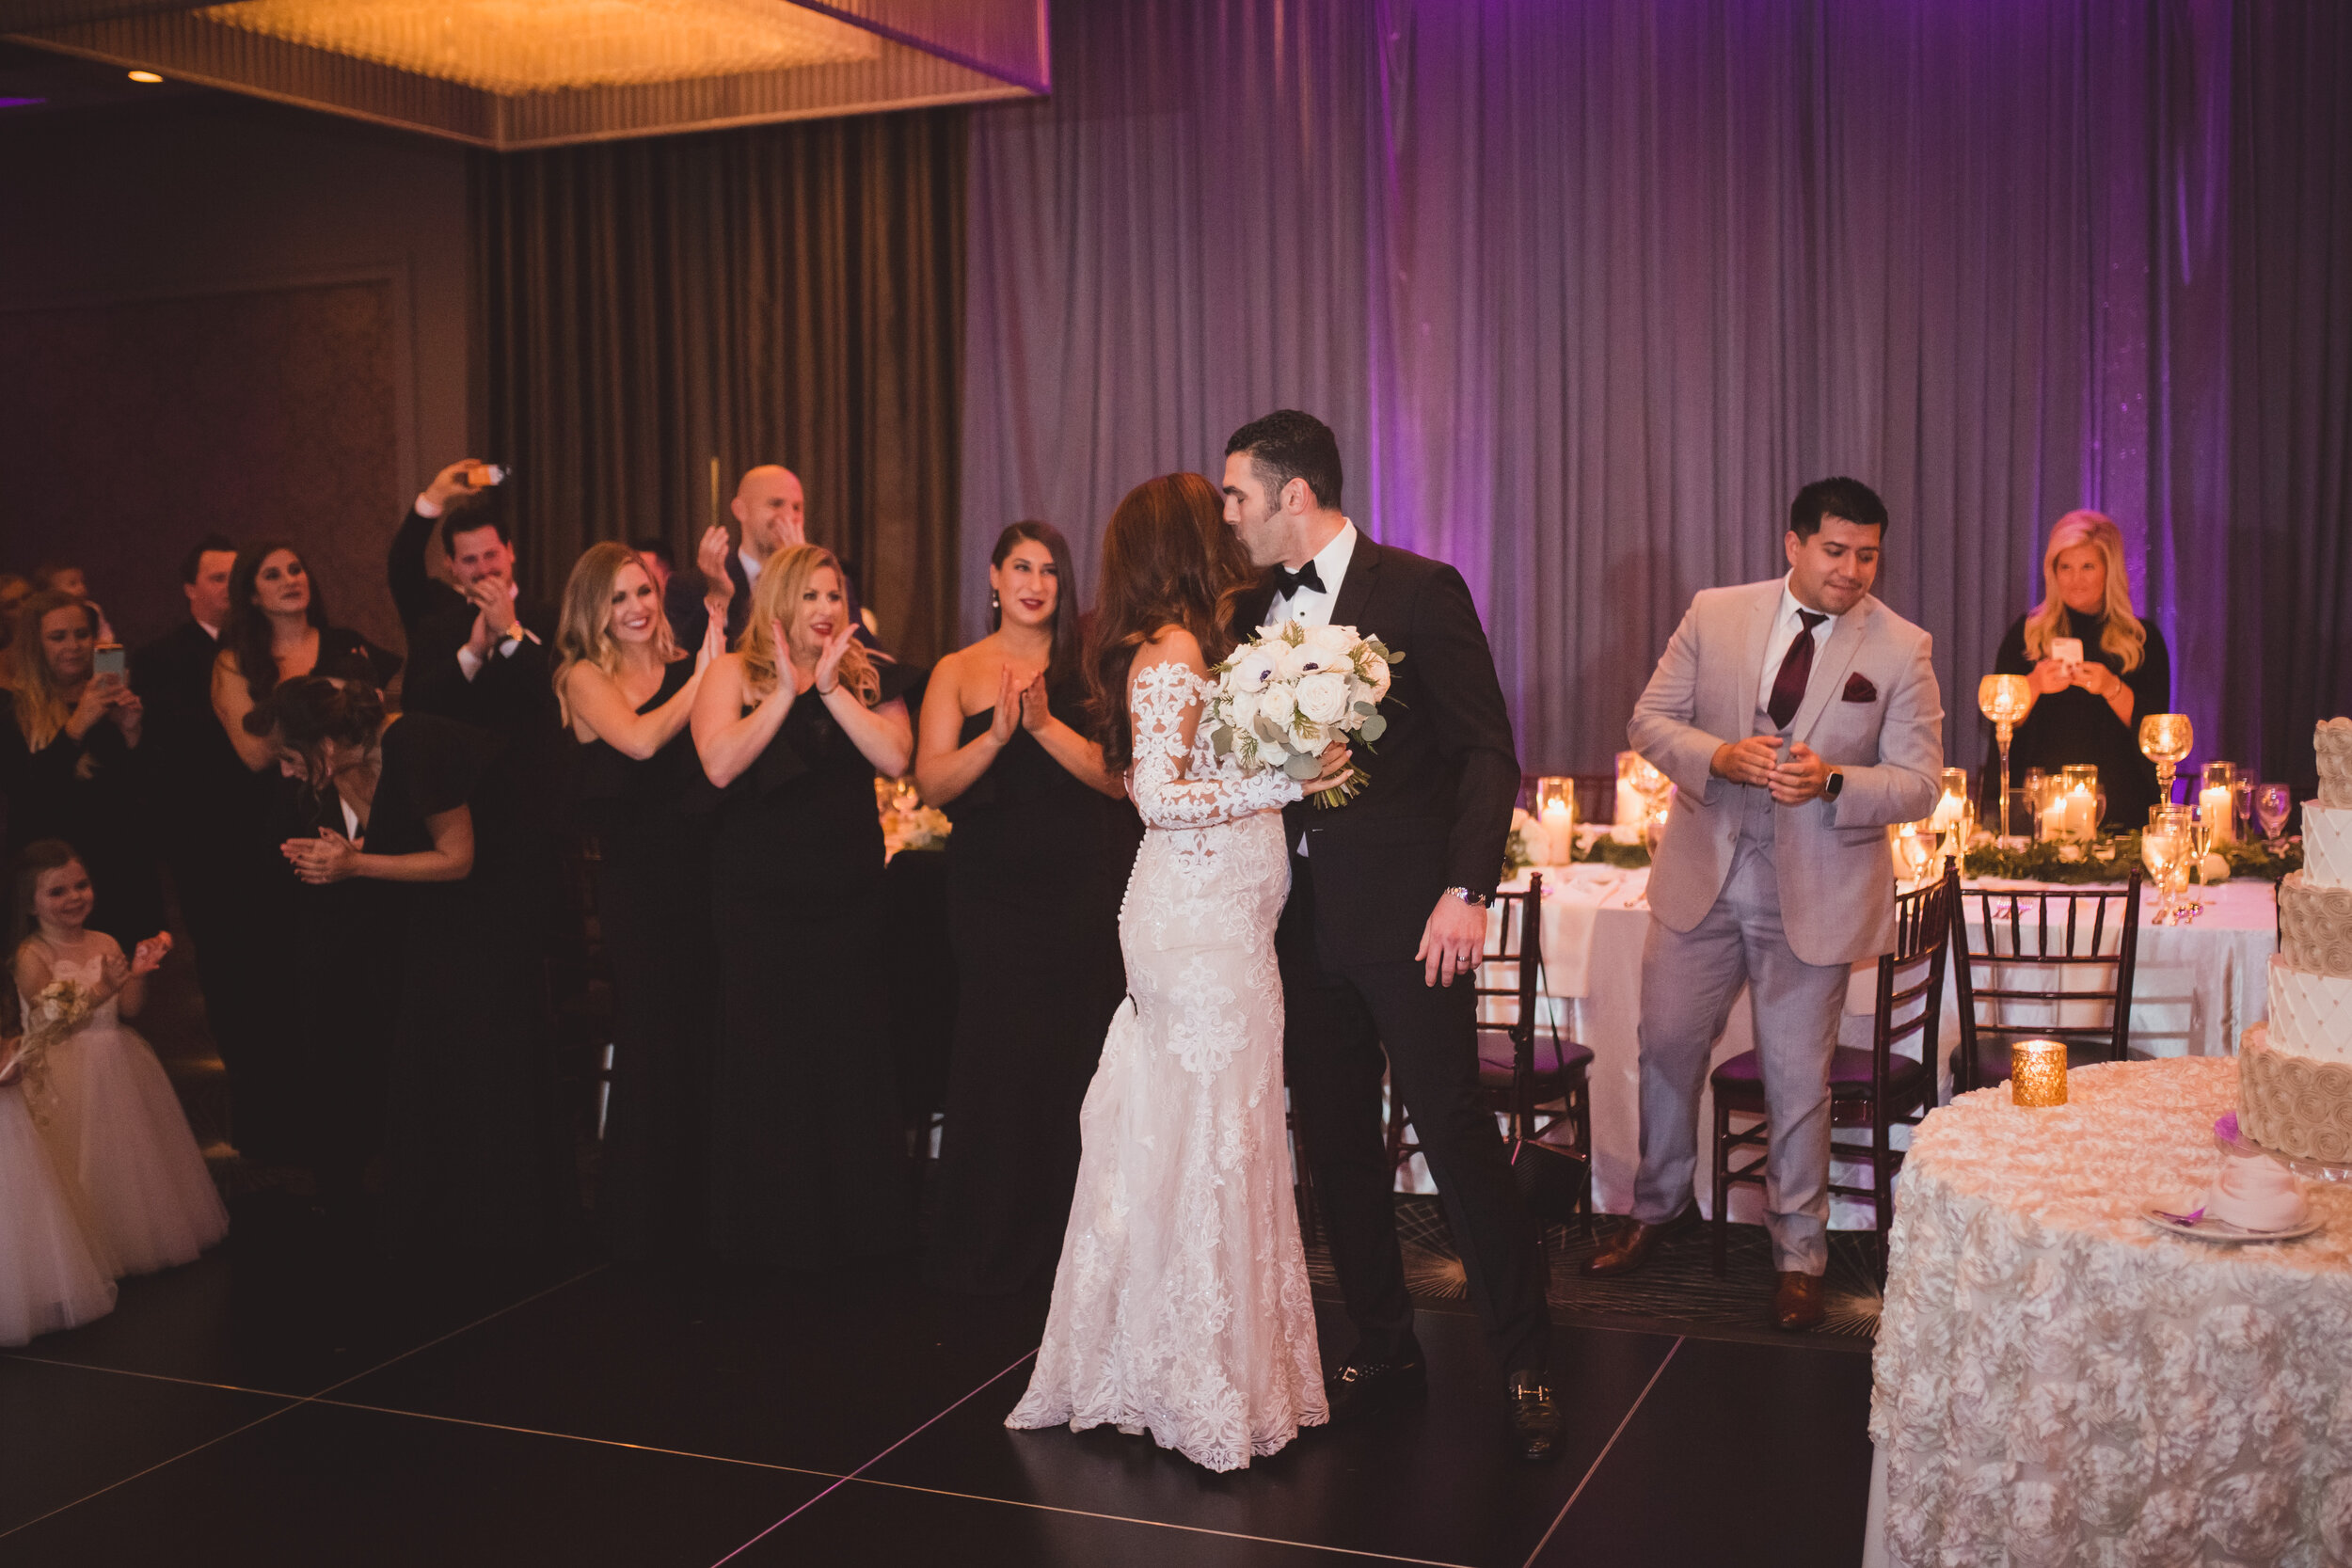 Elegant winter wedding at The Estate by Gene &amp; Georgetti captured by Tim Gunier Photography. See more winter wedding ideas at CHItheeWED.com!